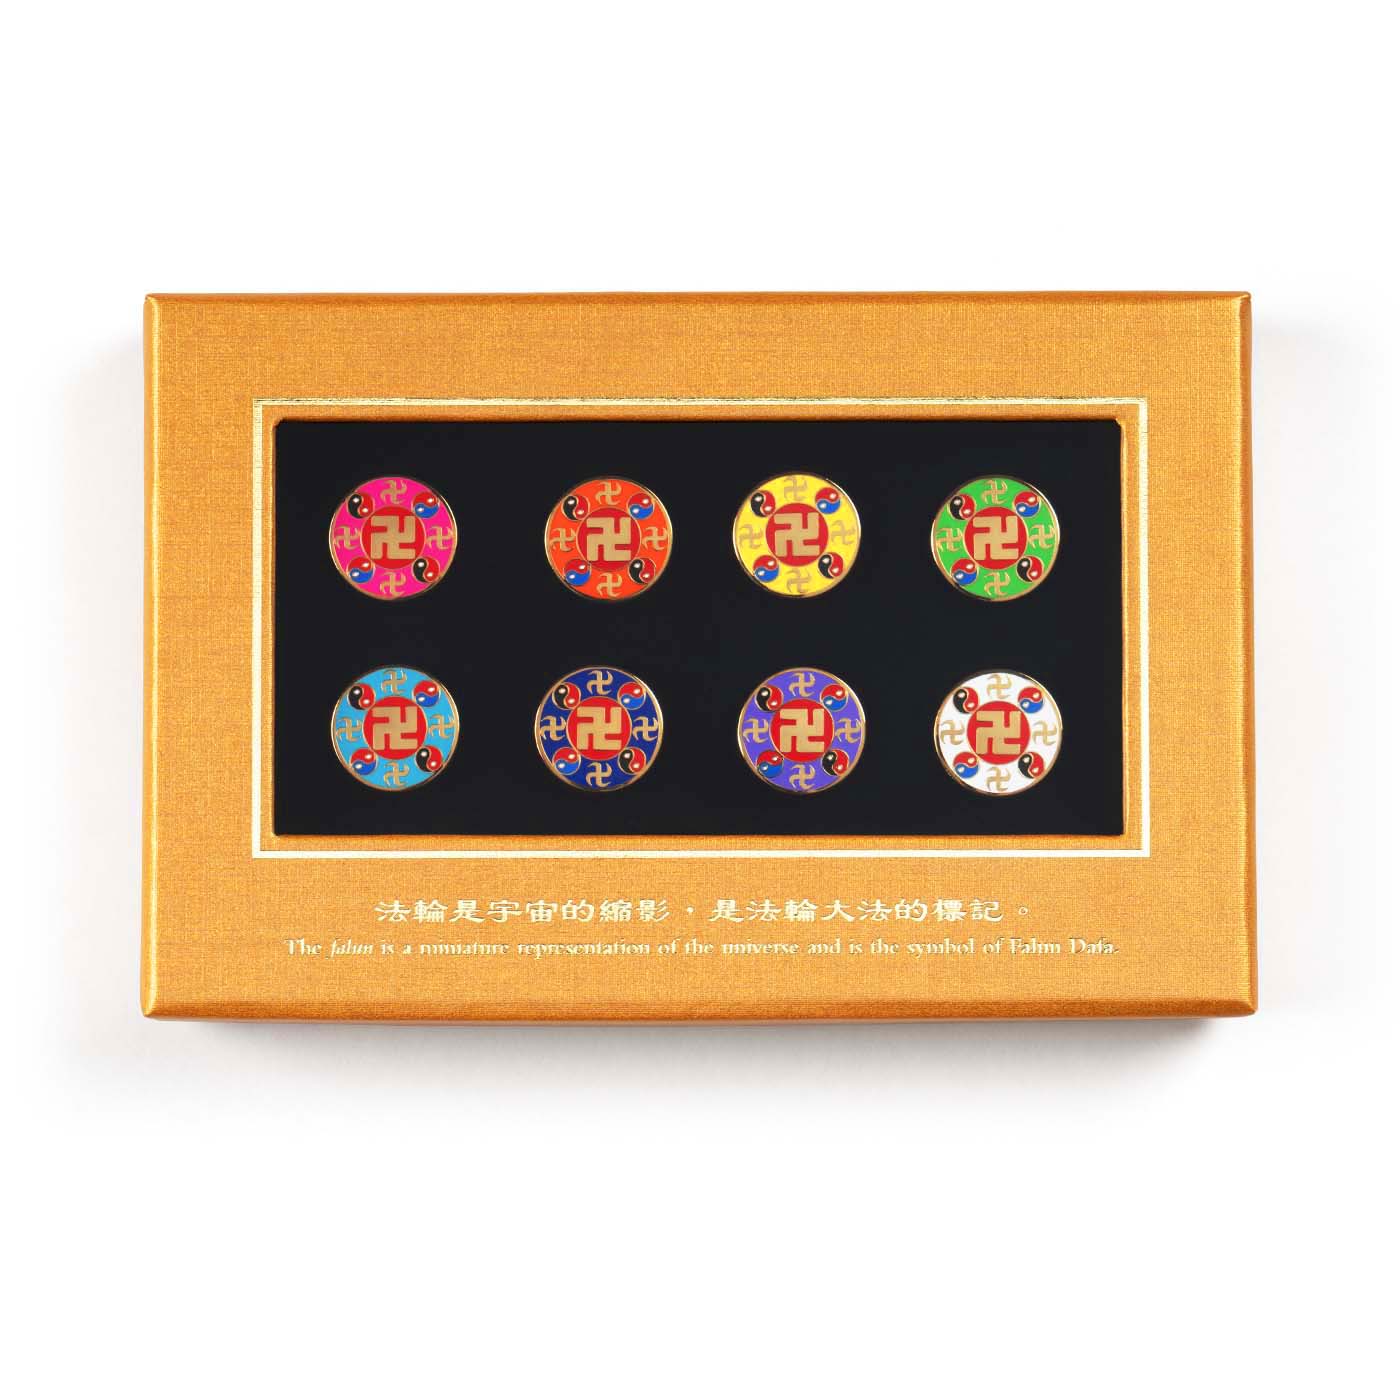 Falun Pin Set of 8 Large Front View | Shen Yun Collections 